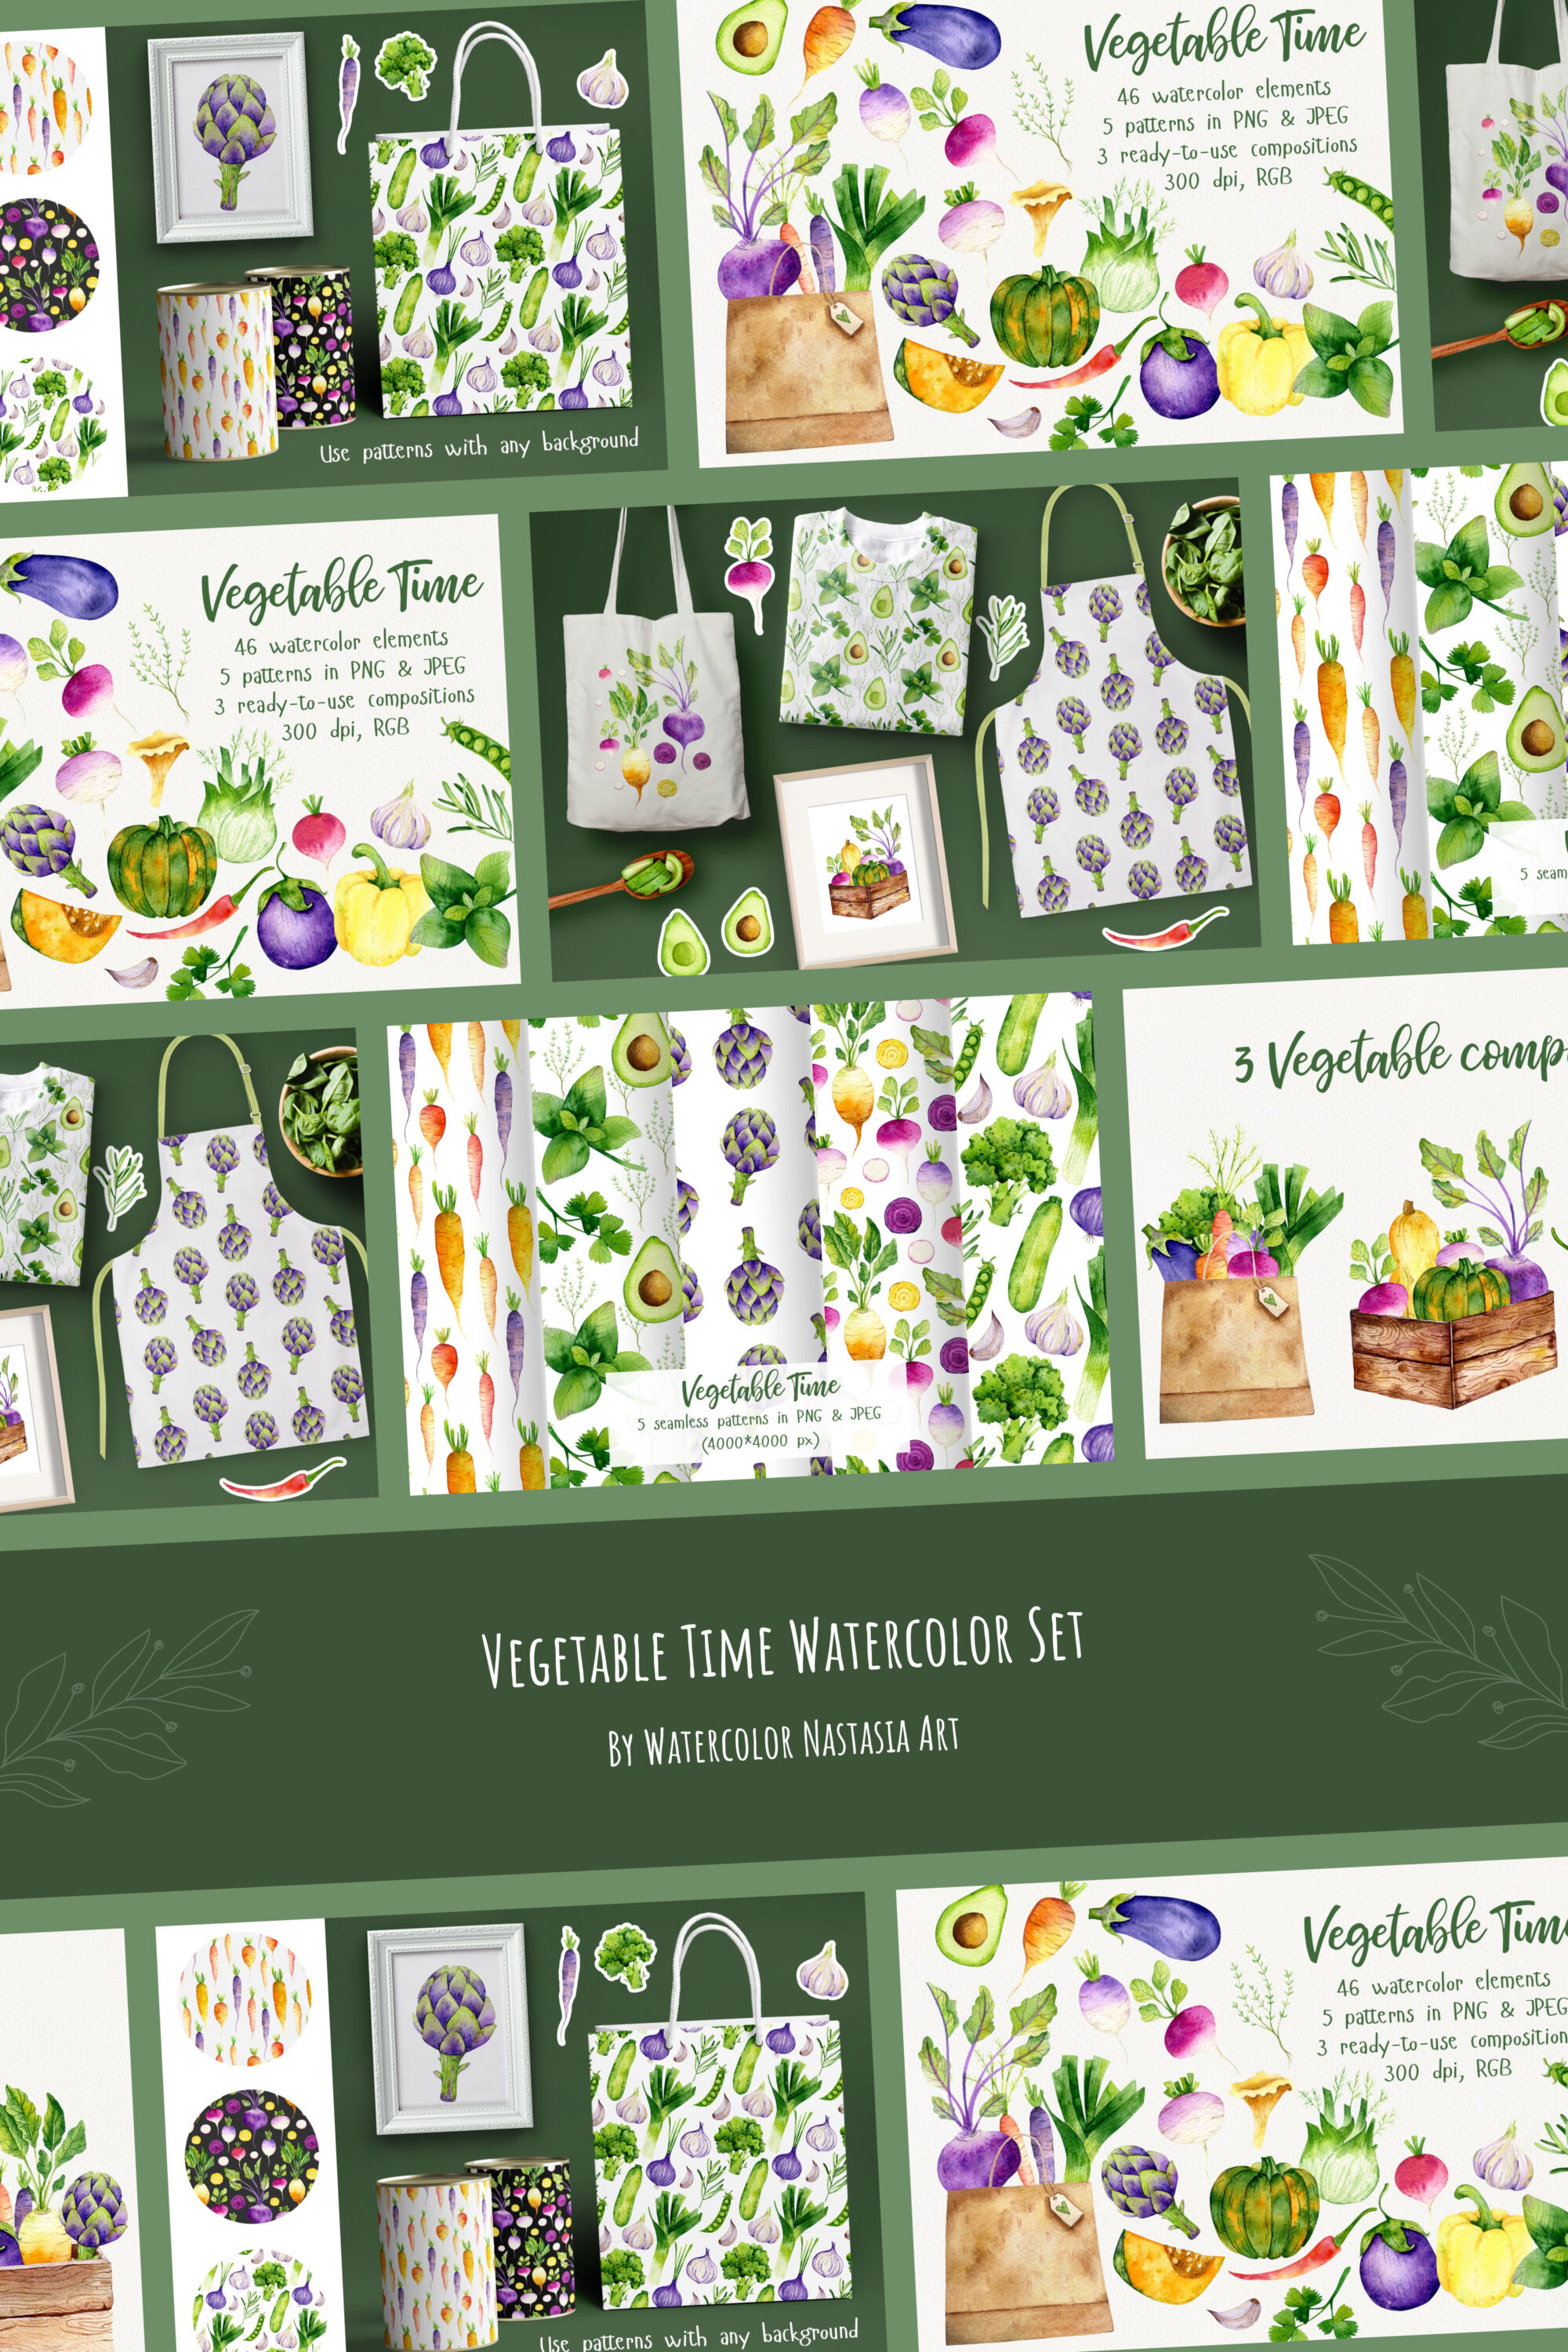 Vegetable time watercolor set of pinterest.